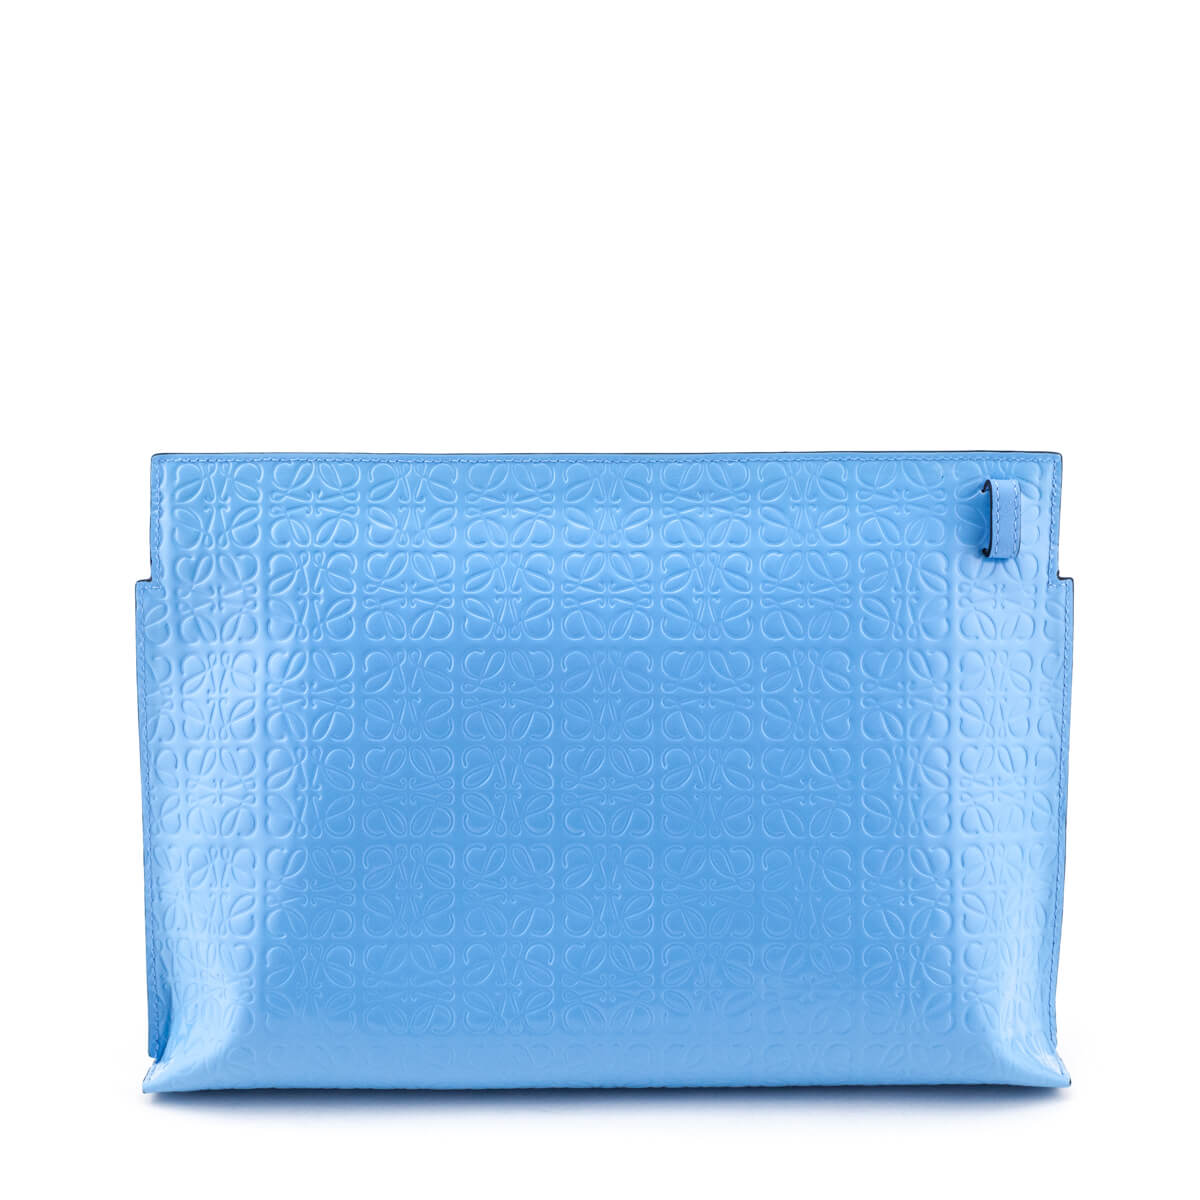 Loewe Light Blue Patent Embossed Calfskin T Pouch Repeat - Love that Bag etc - Preowned Authentic Designer Handbags & Preloved Fashions